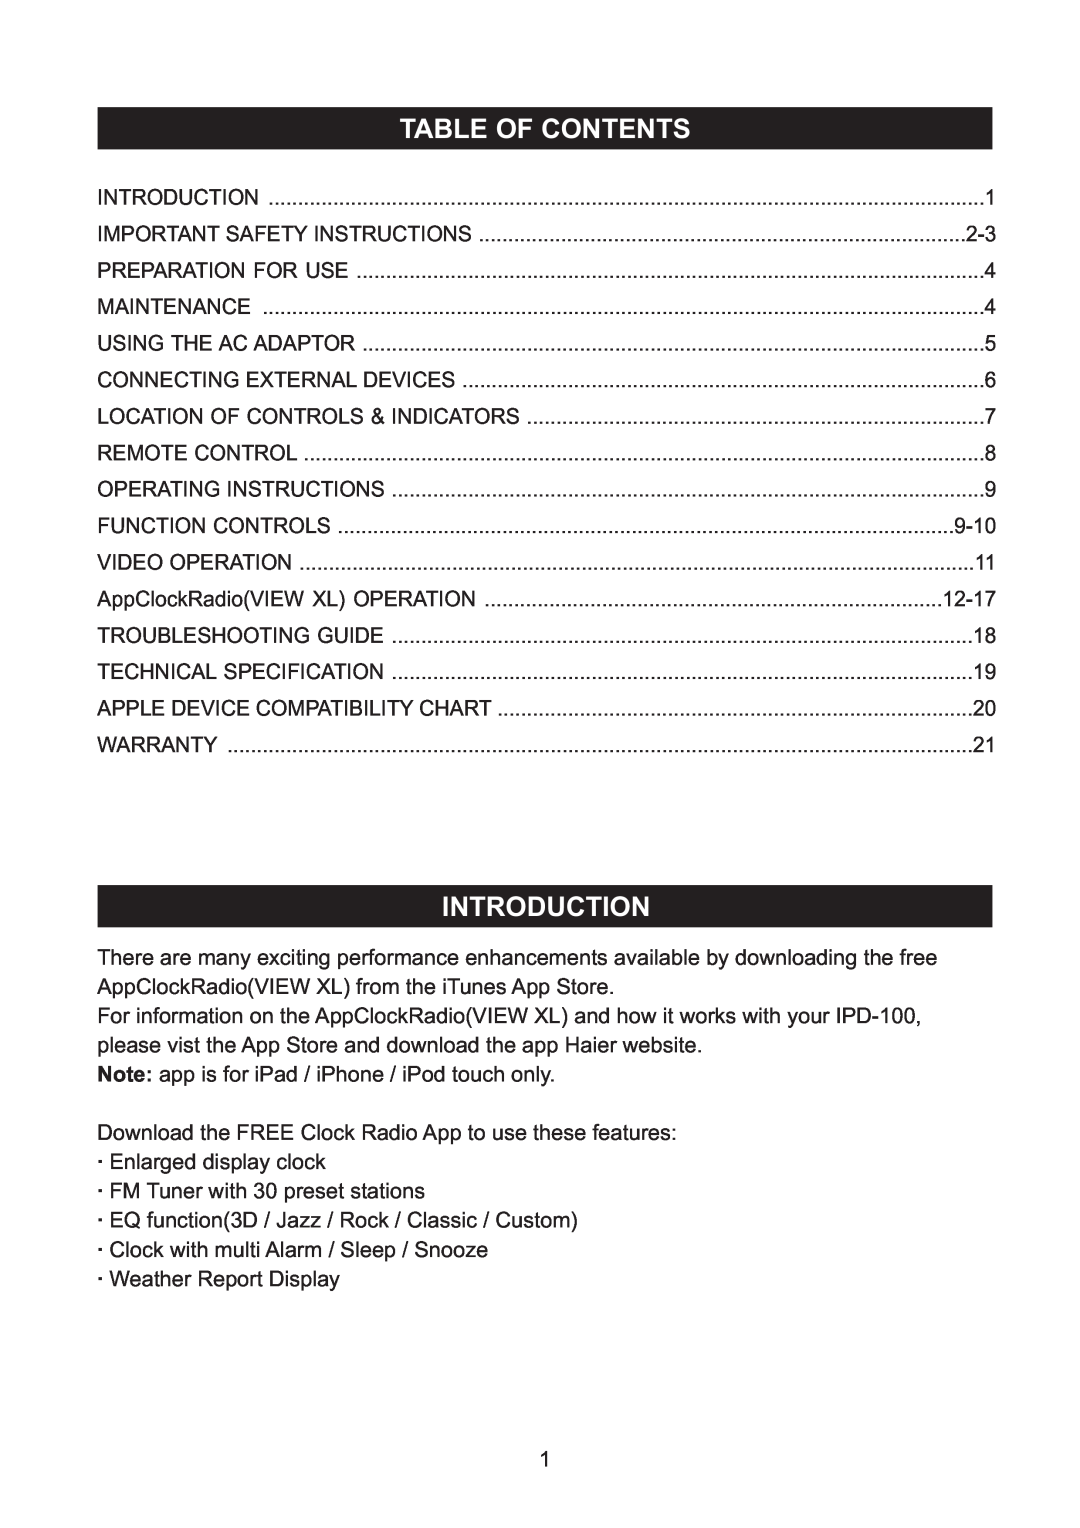 Haier IPD-100 manual Table Of Contents, Introduction 